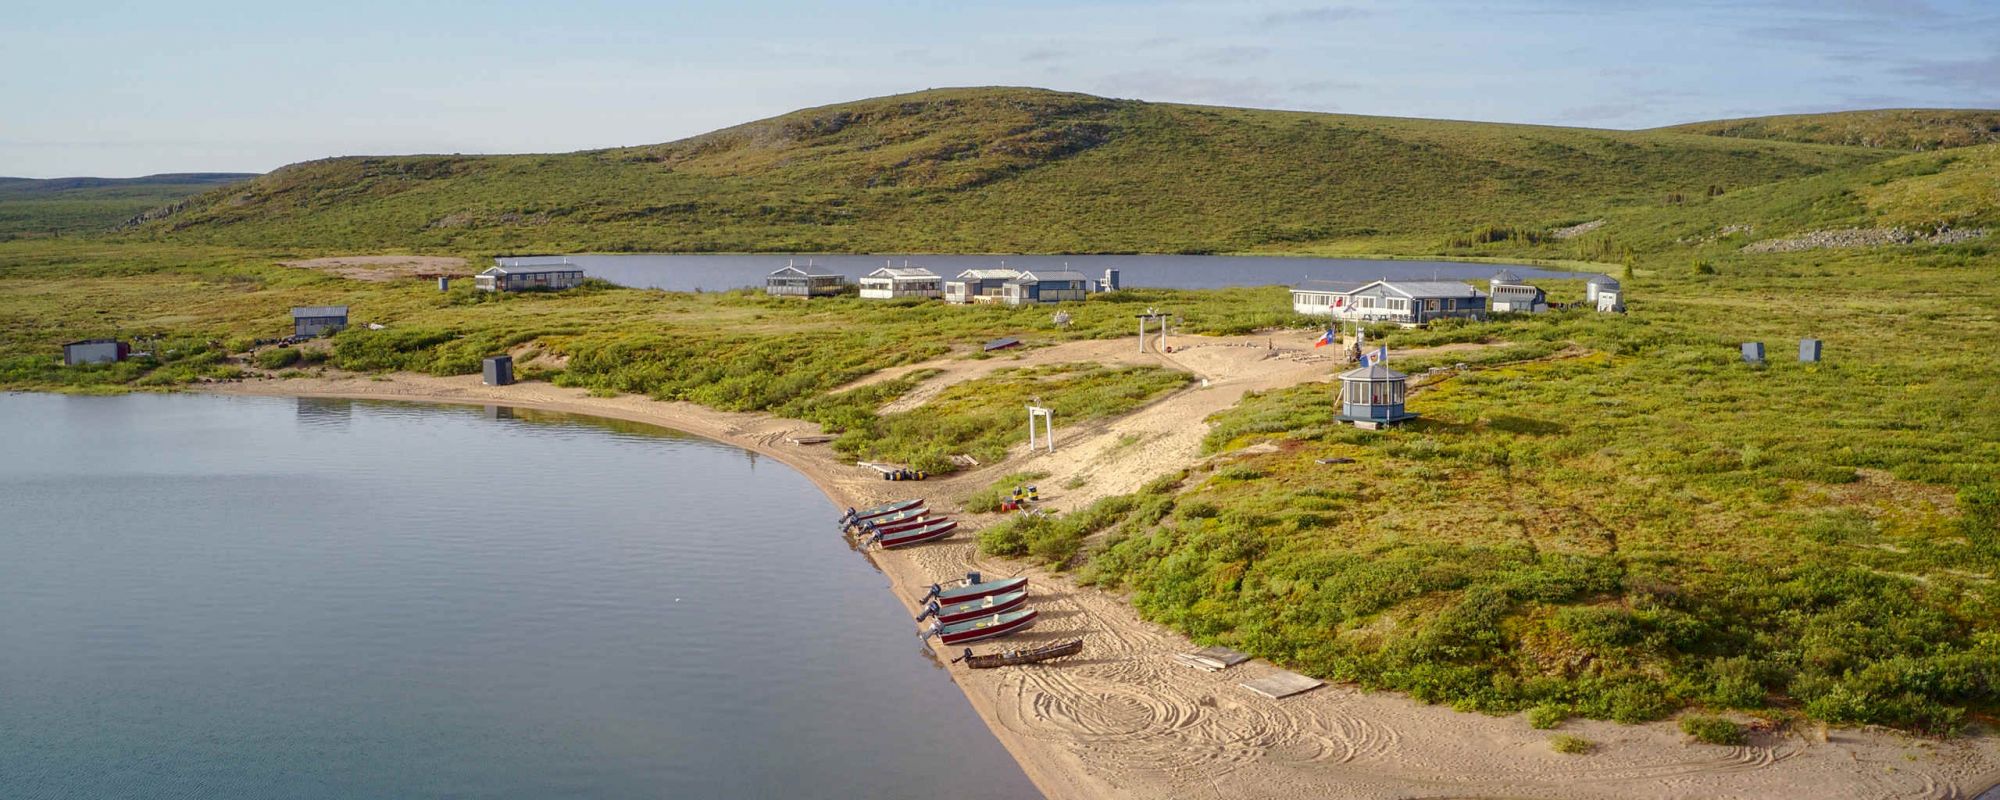 Lodge and boats on beautiful sand beach in the barrens